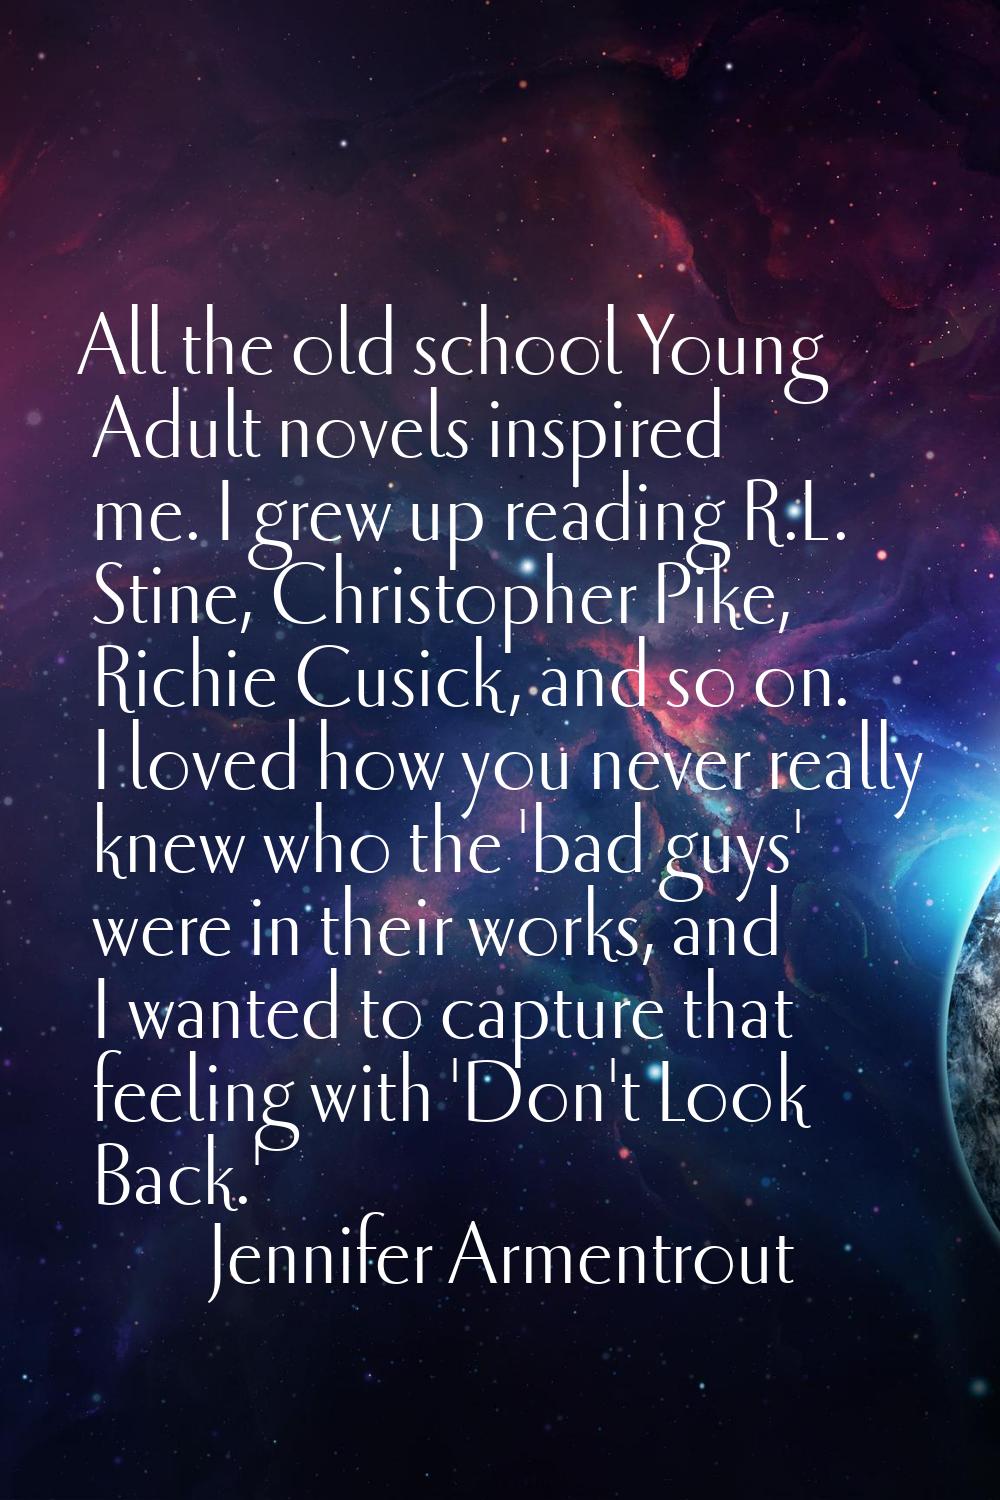 All the old school Young Adult novels inspired me. I grew up reading R.L. Stine, Christopher Pike, 